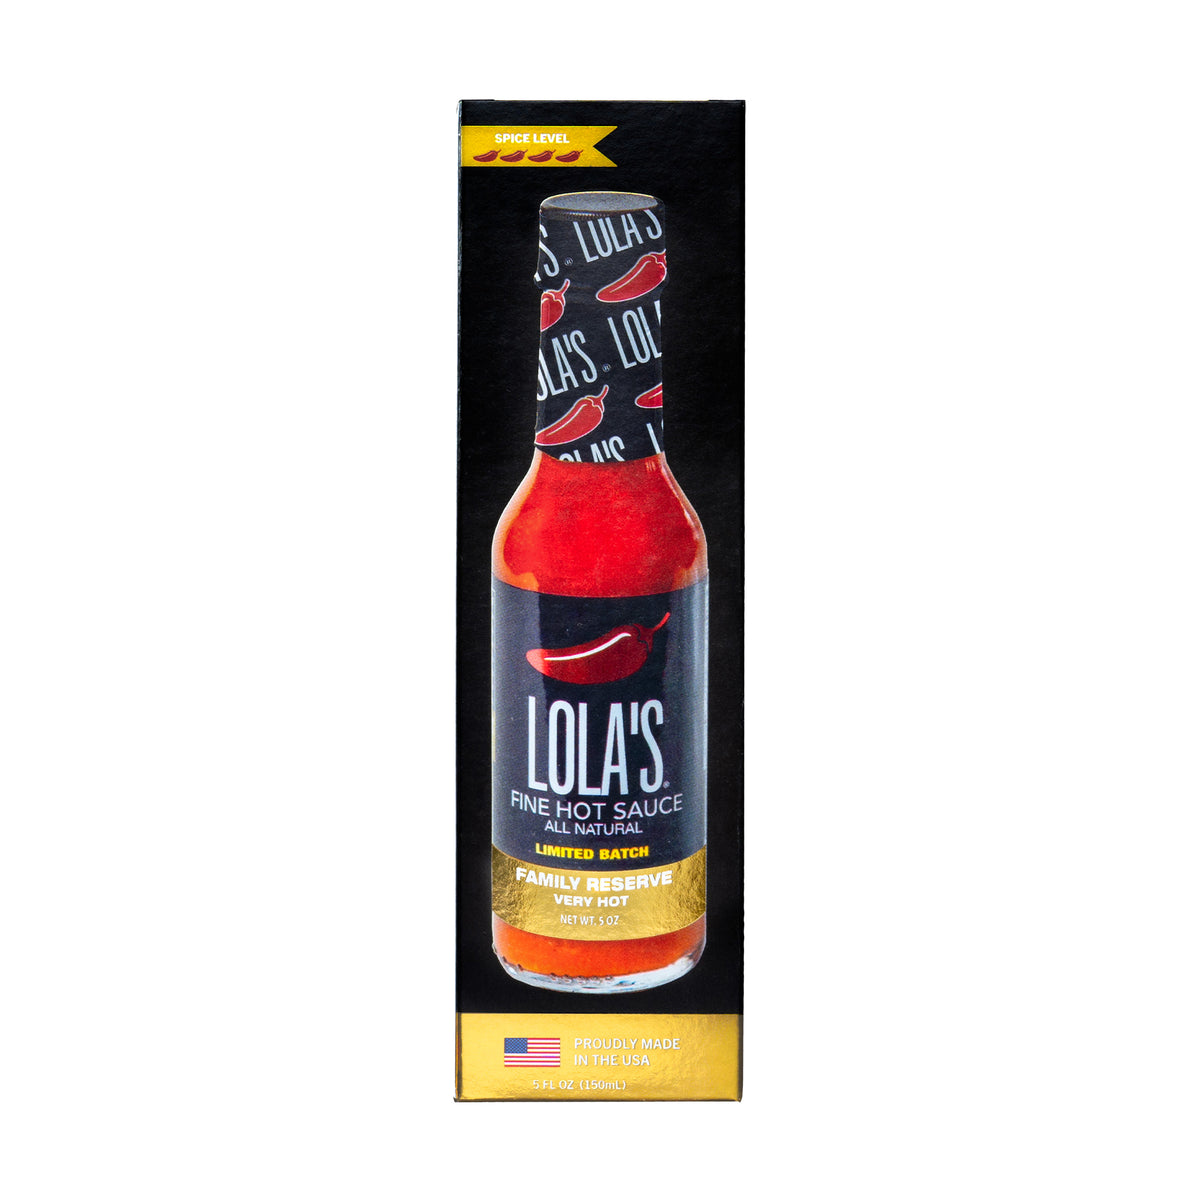 A bottle of Lola's Family Reserve Hot Sauce, featuring Carolina reaper and habanero peppers for a sweet, smoky, lime flavor with intense heat. 5 oz. glass bottle with premium gift box. 